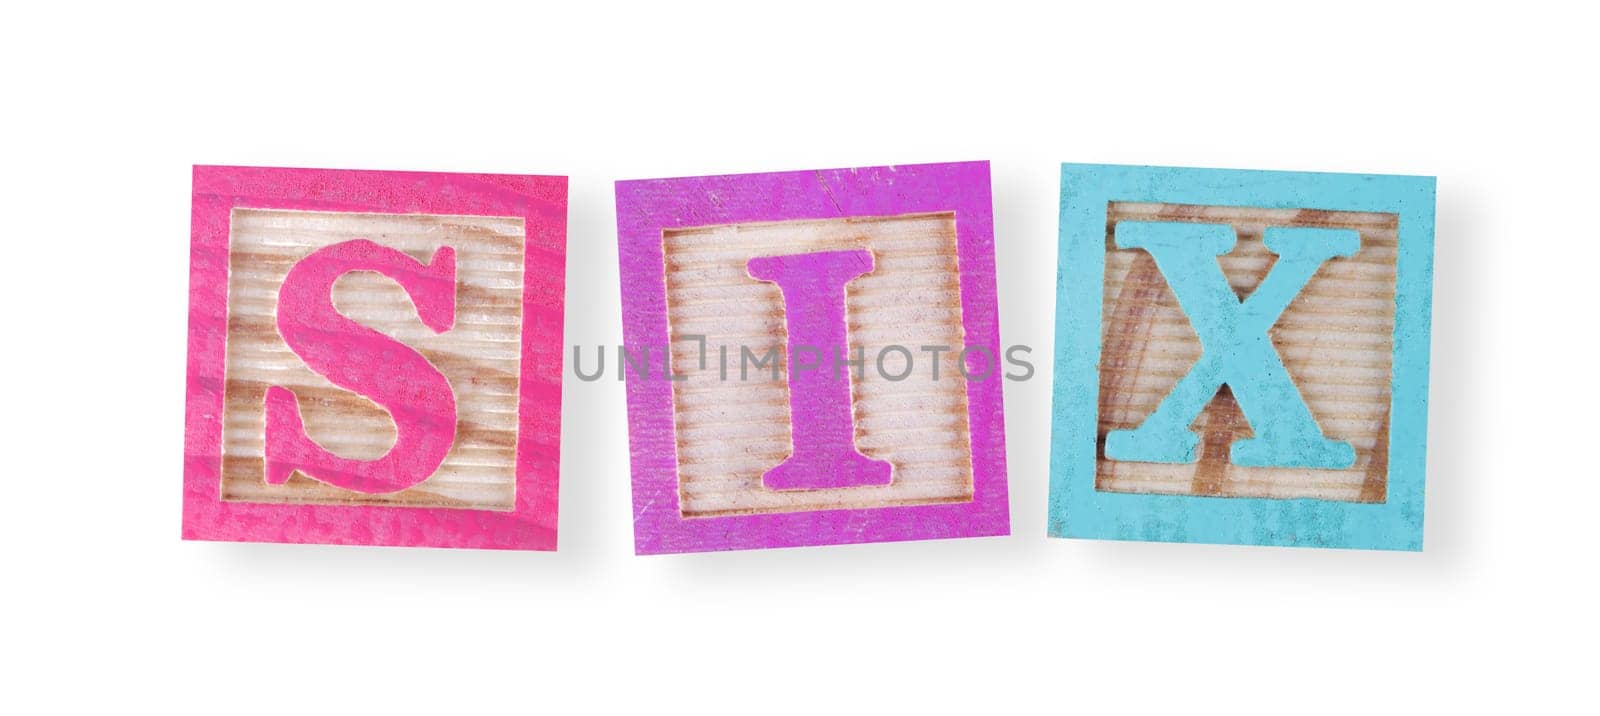 A Six concept with childs wood blocks on white with clipping path to remove shadow